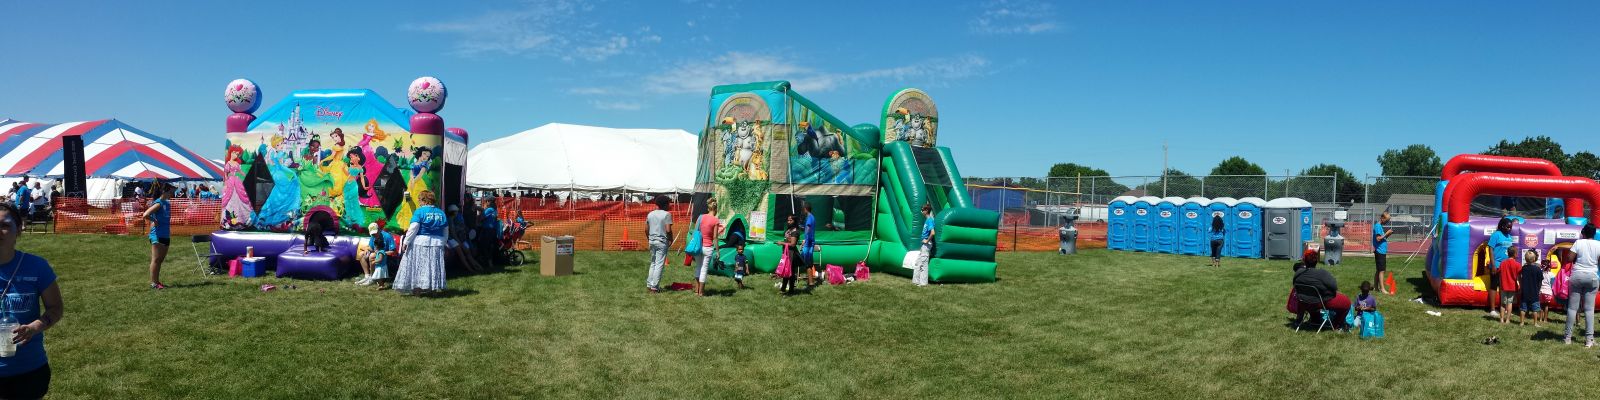 Zoo Combo with other Inflatables at large fundraiser